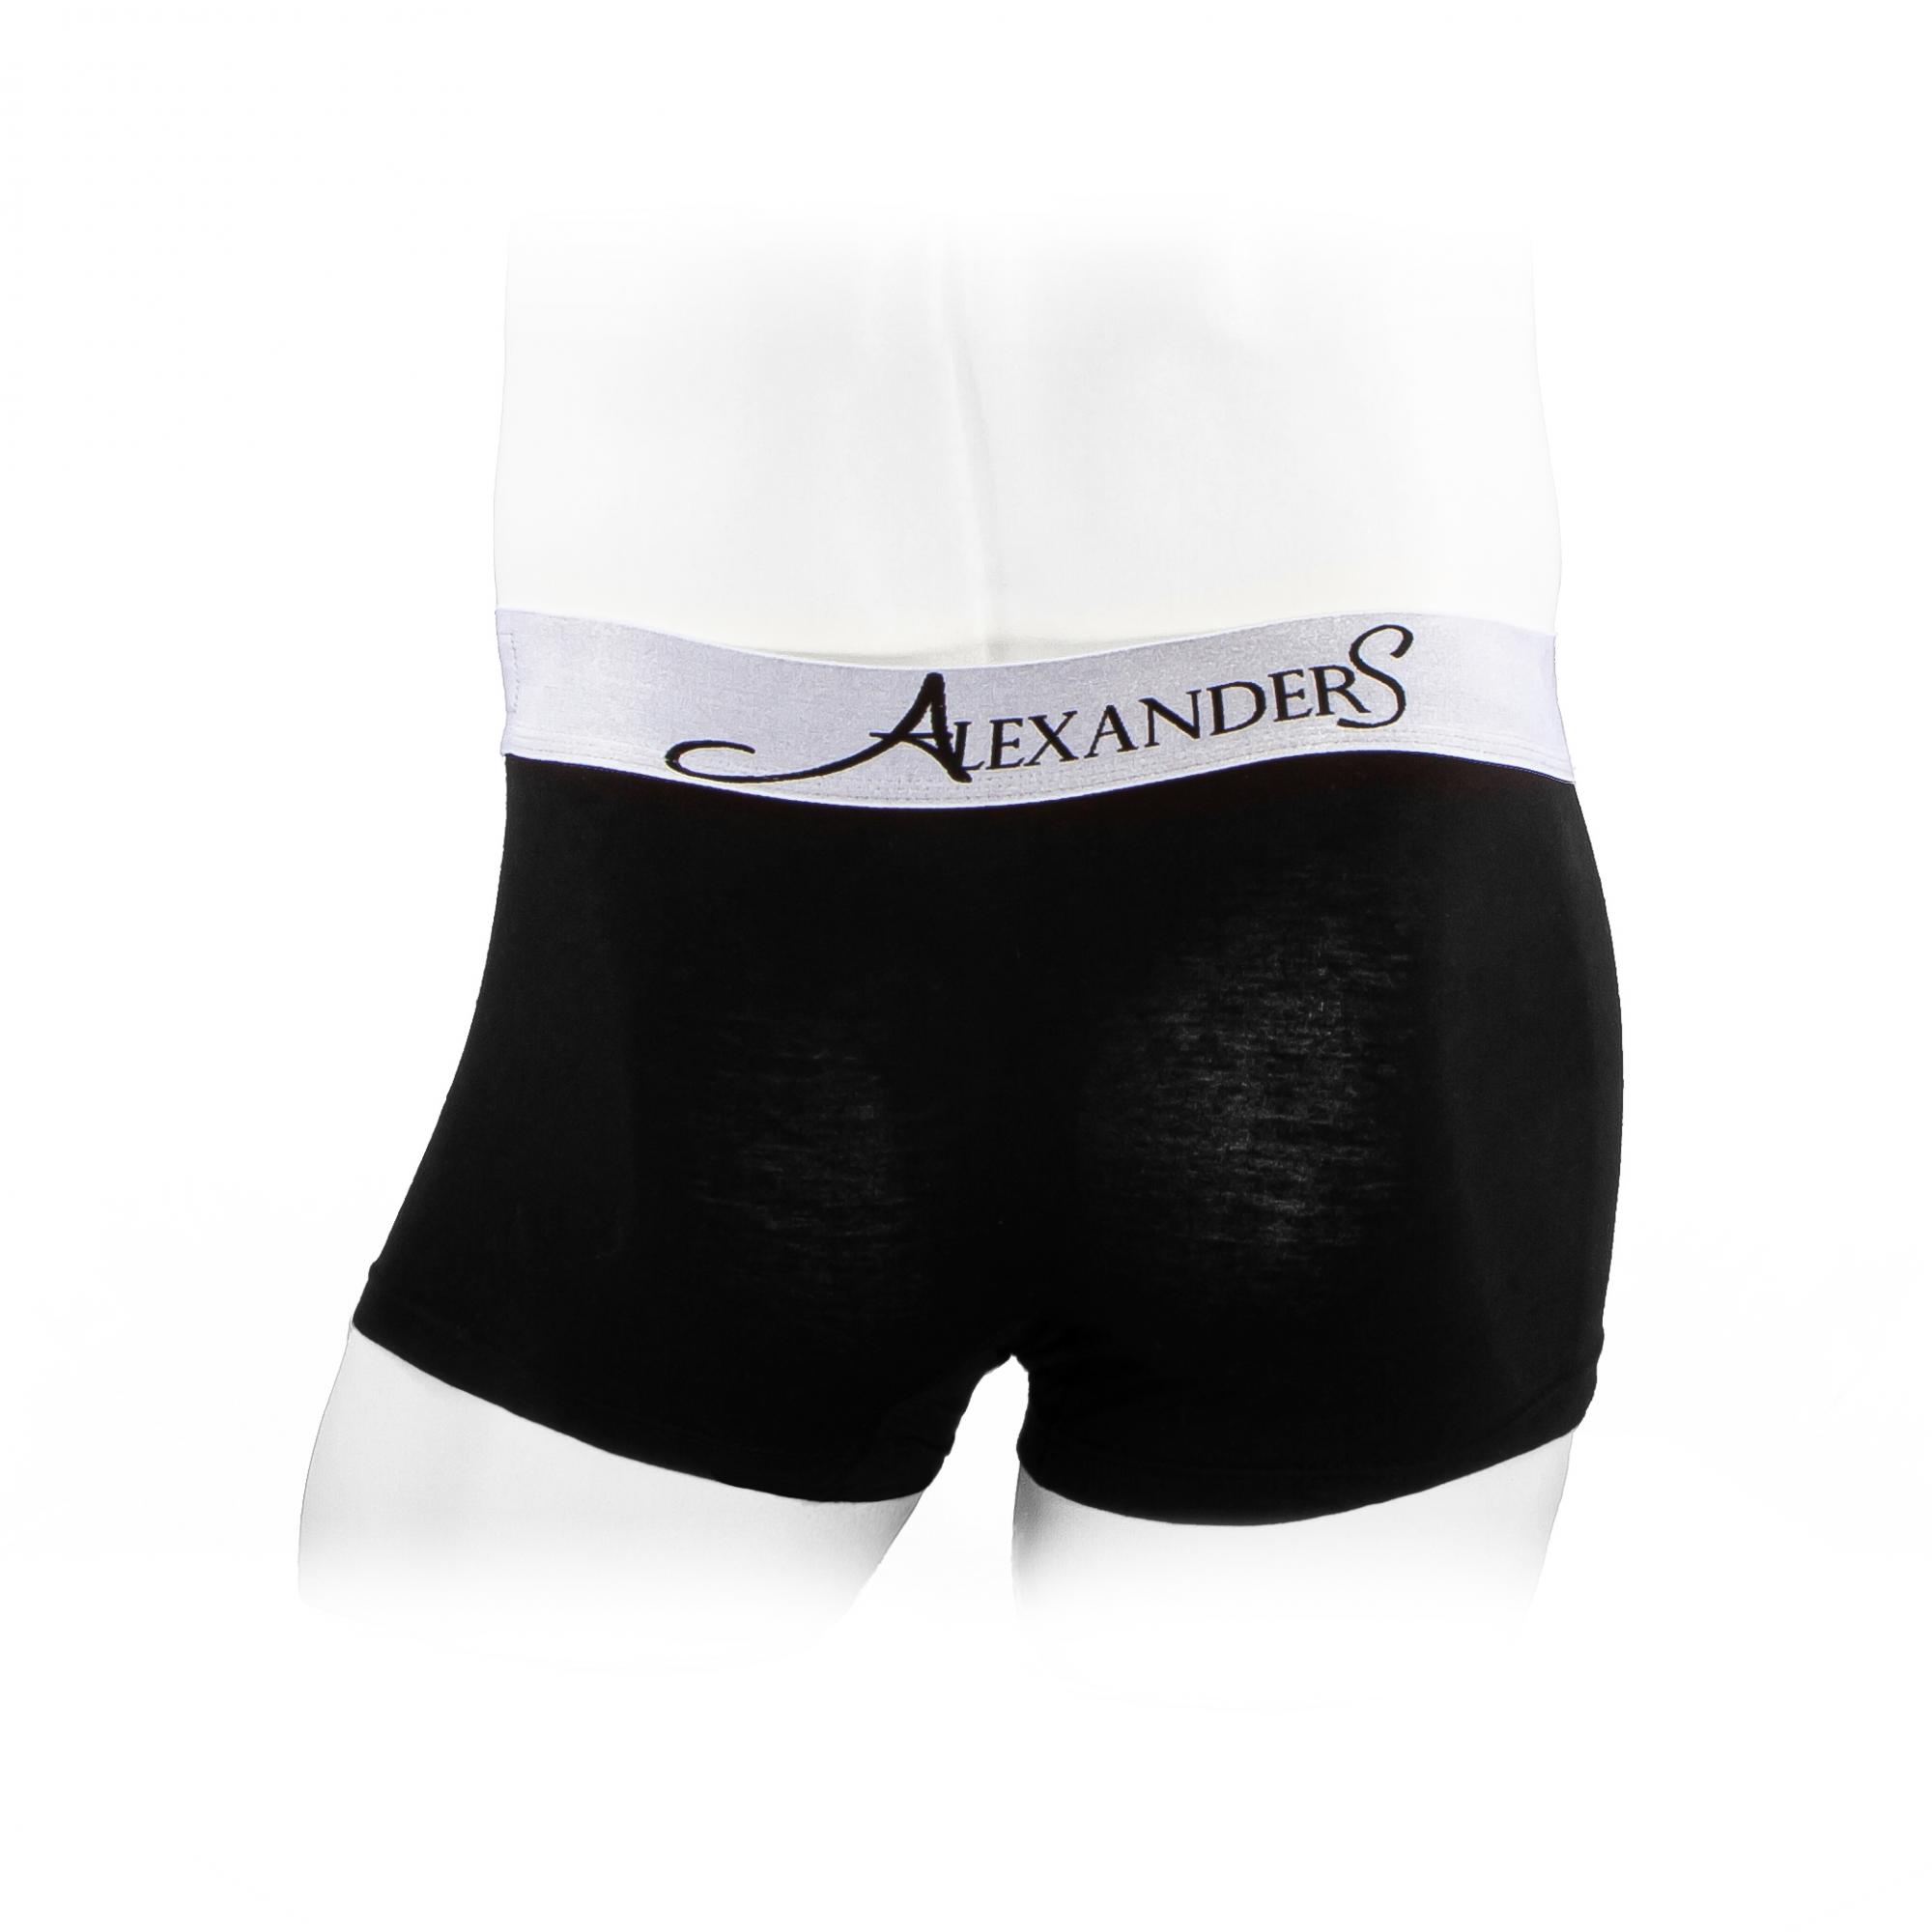 Find your favourite trunks from AlexanderS range, featuring the latest styles and best fits for ultimate comfort. These trunks are perfect for any season.